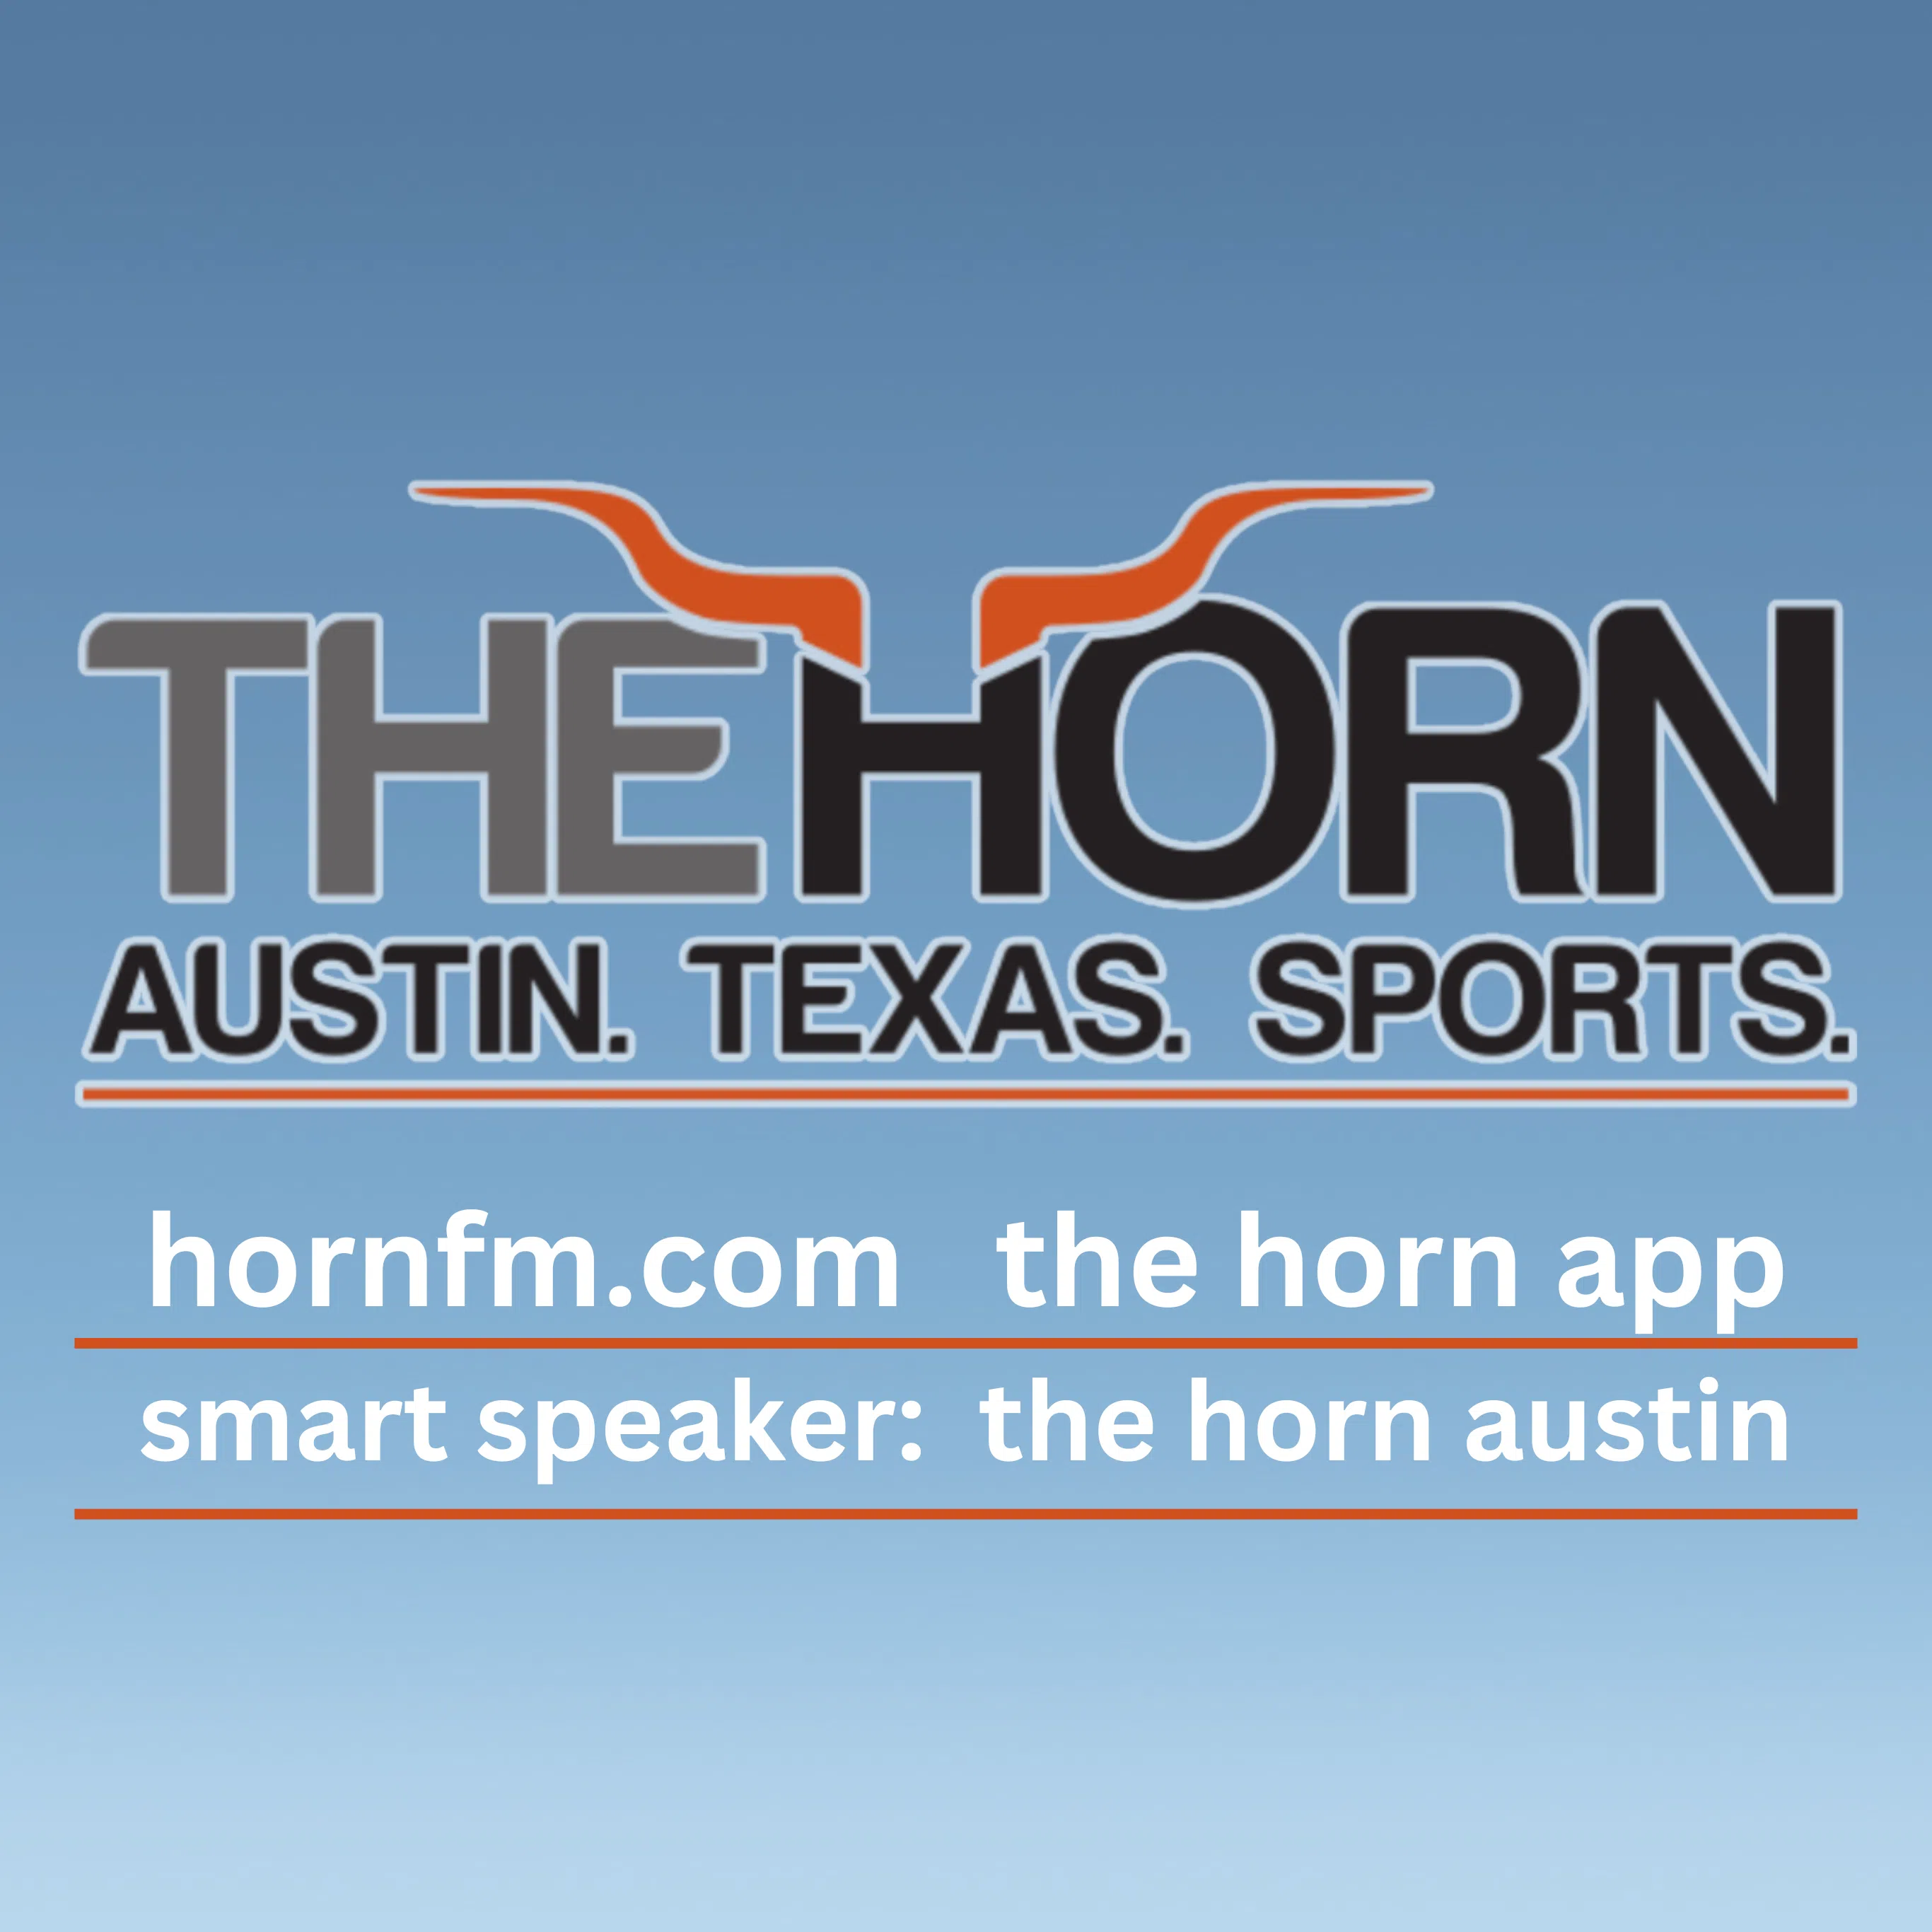 The HORN Streaming Transition